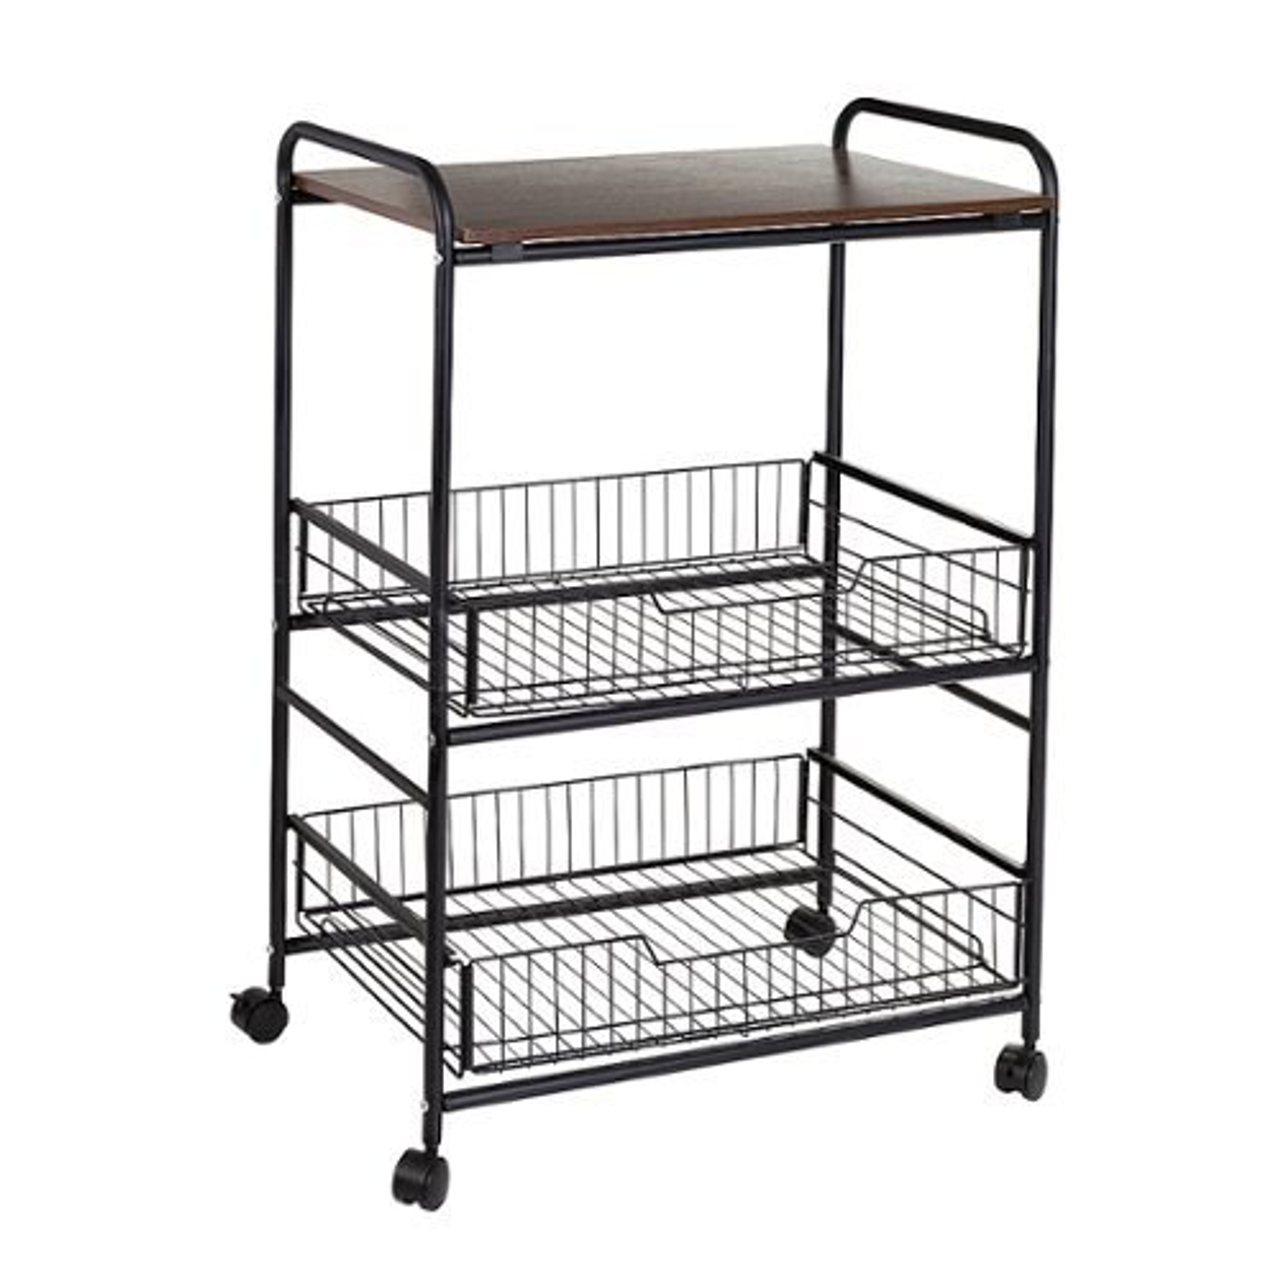 Honey-Can-Do - 3-Tier Rolling Cart with Wood Shelf and Pull-Out Baskets - Black/Brown